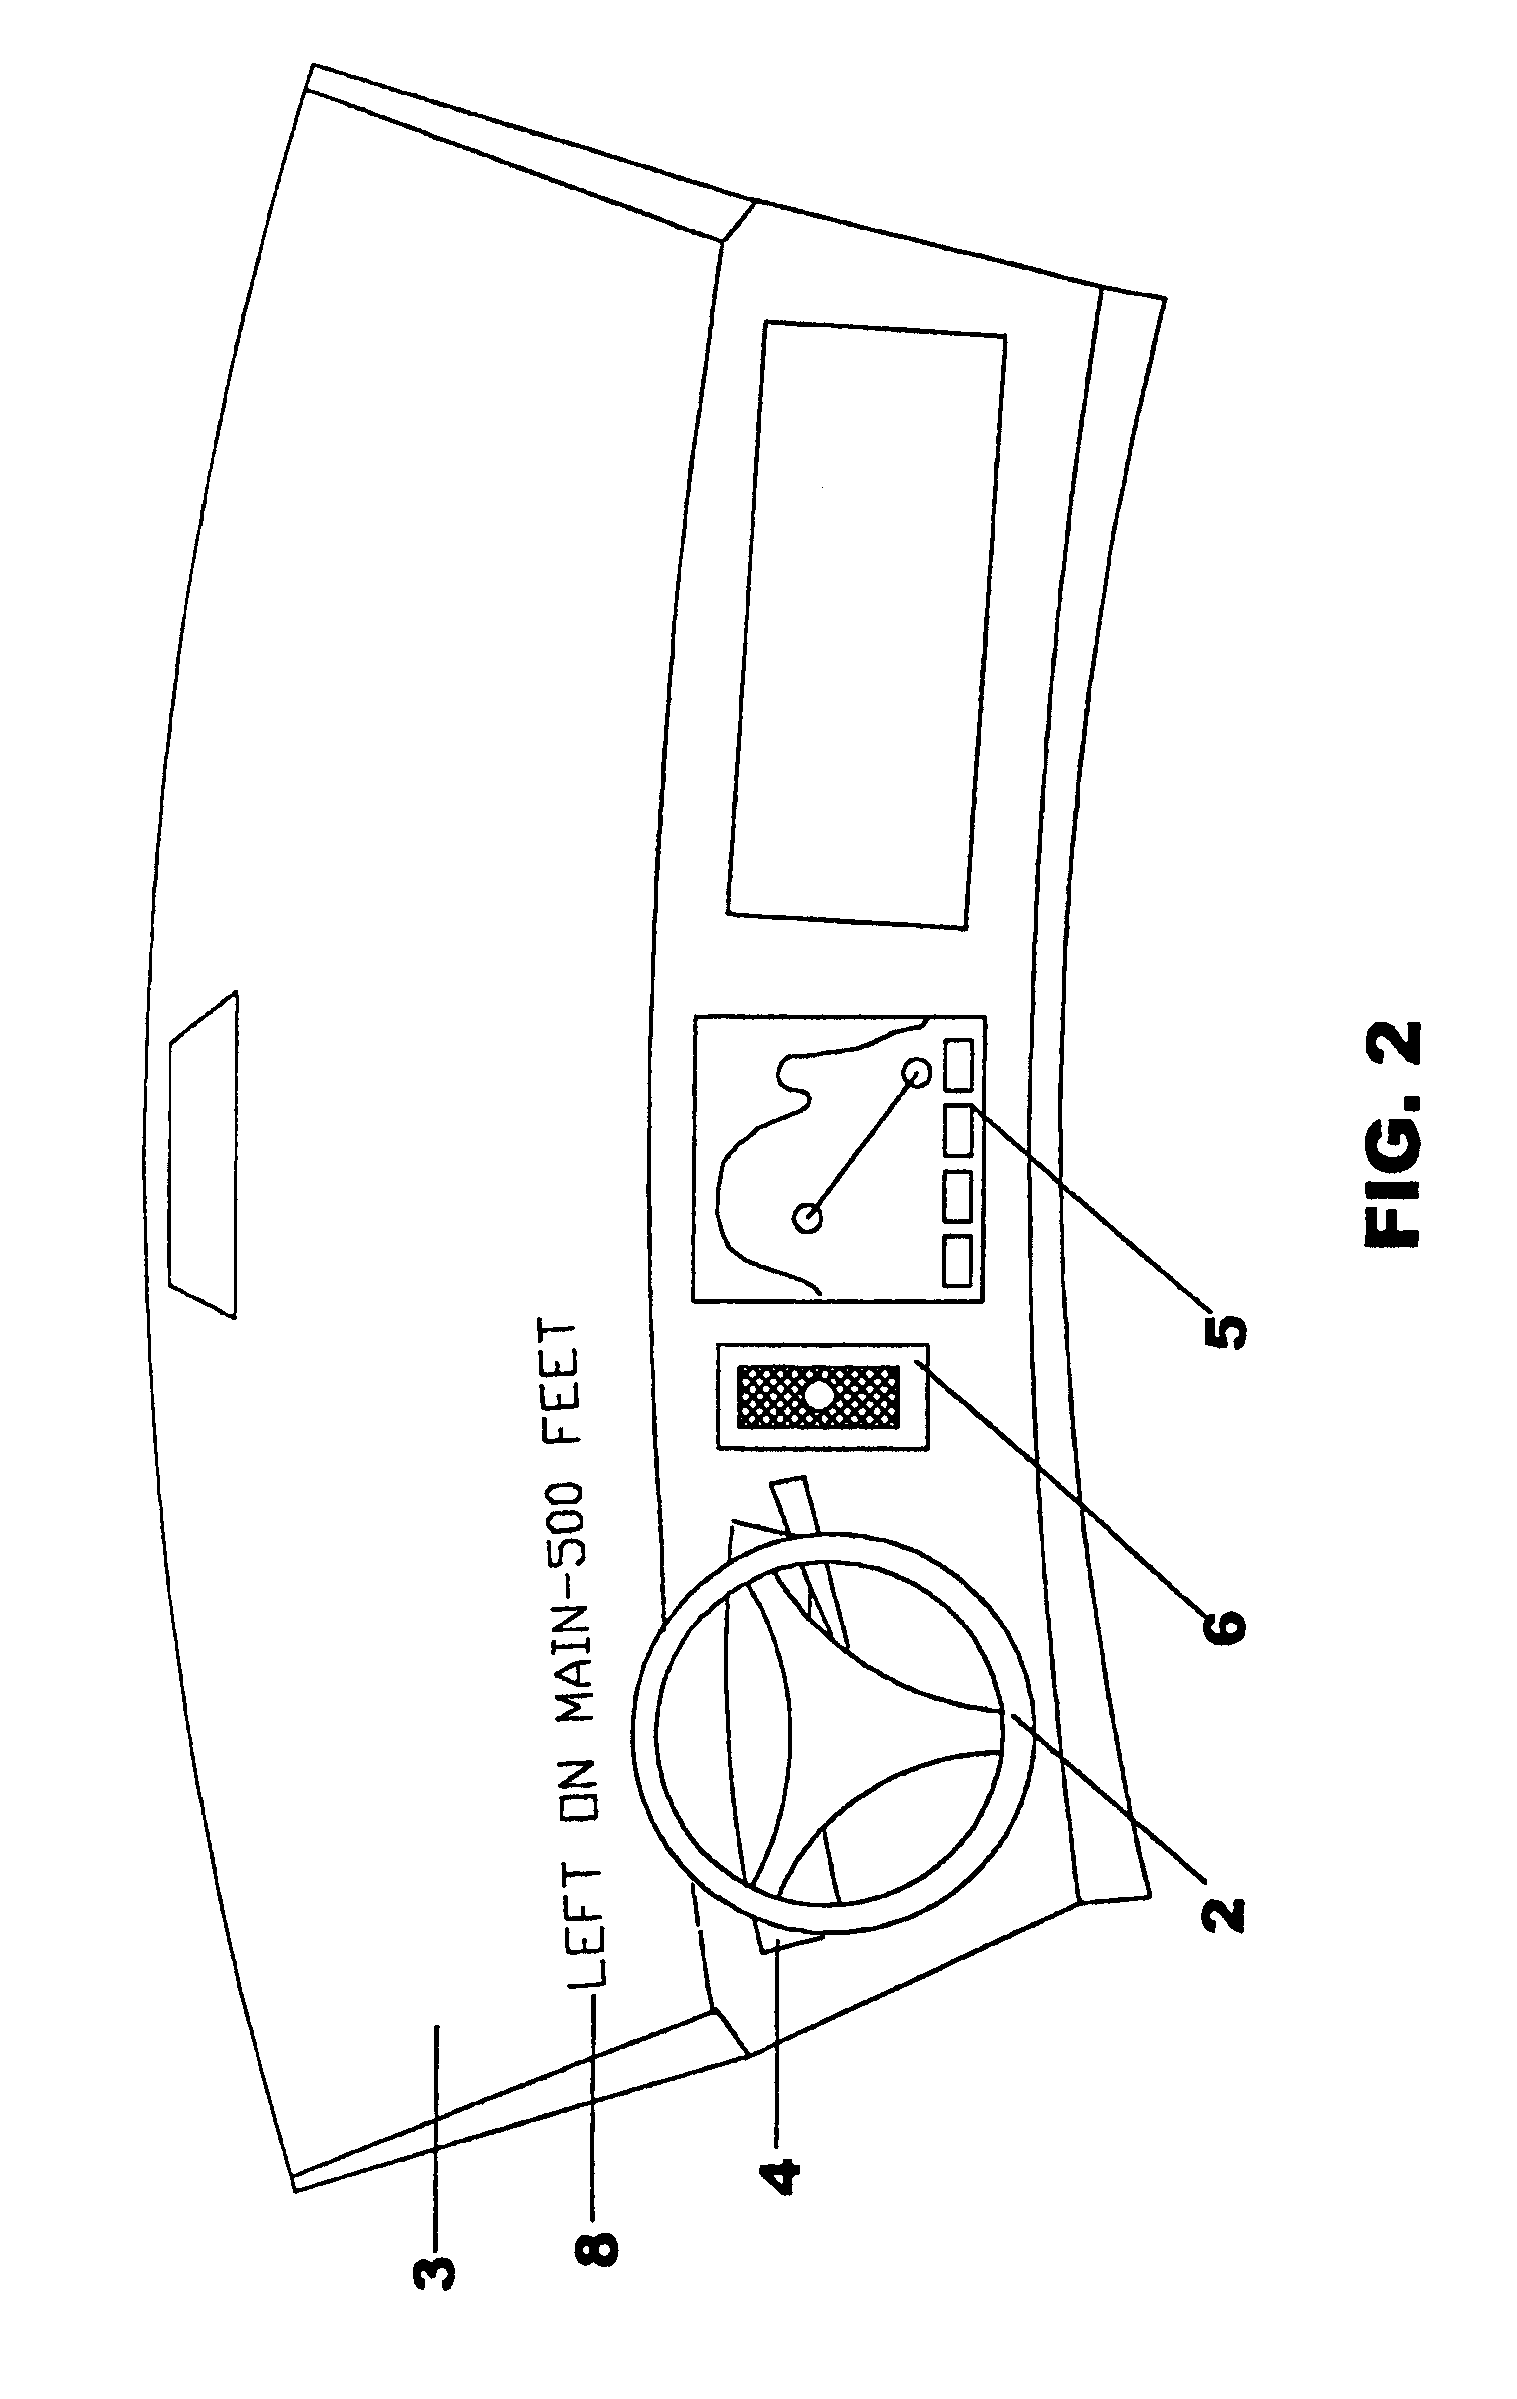 Method and system for providing directions for driving